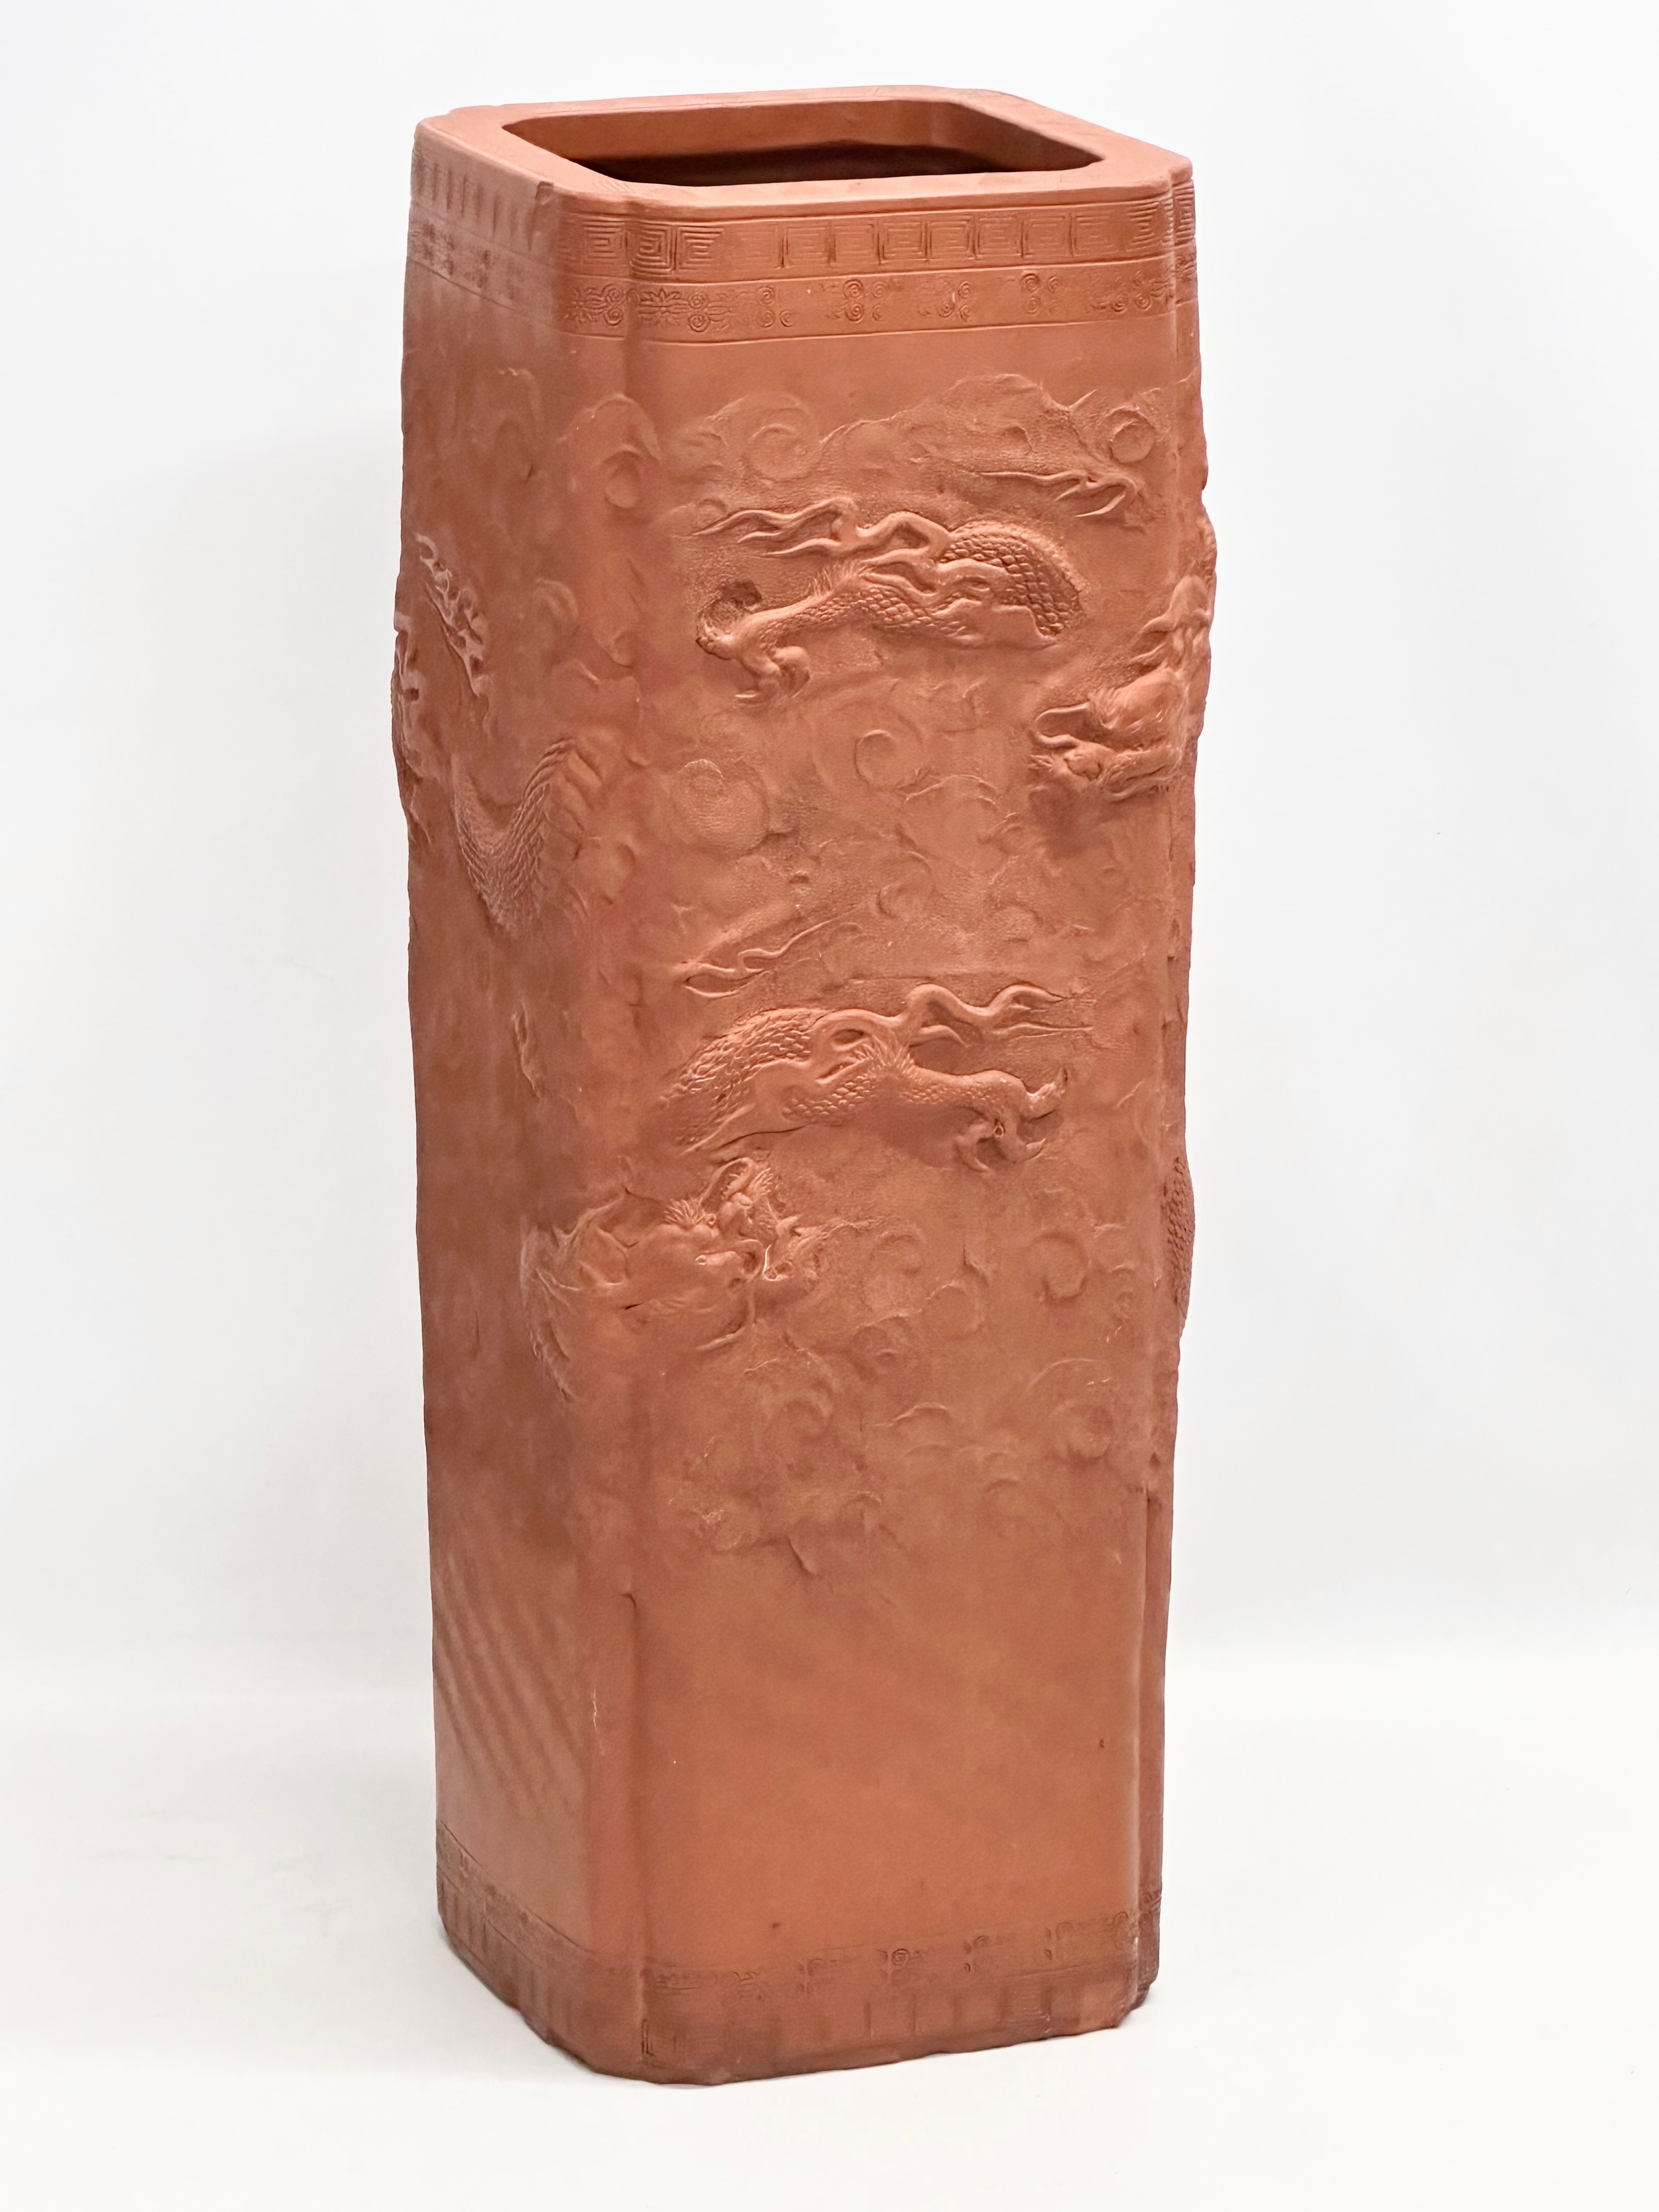 A Chinese terracotta stick stand/planter with dragon motif and Greek Key decoration. 21x21x61cm - Image 3 of 8